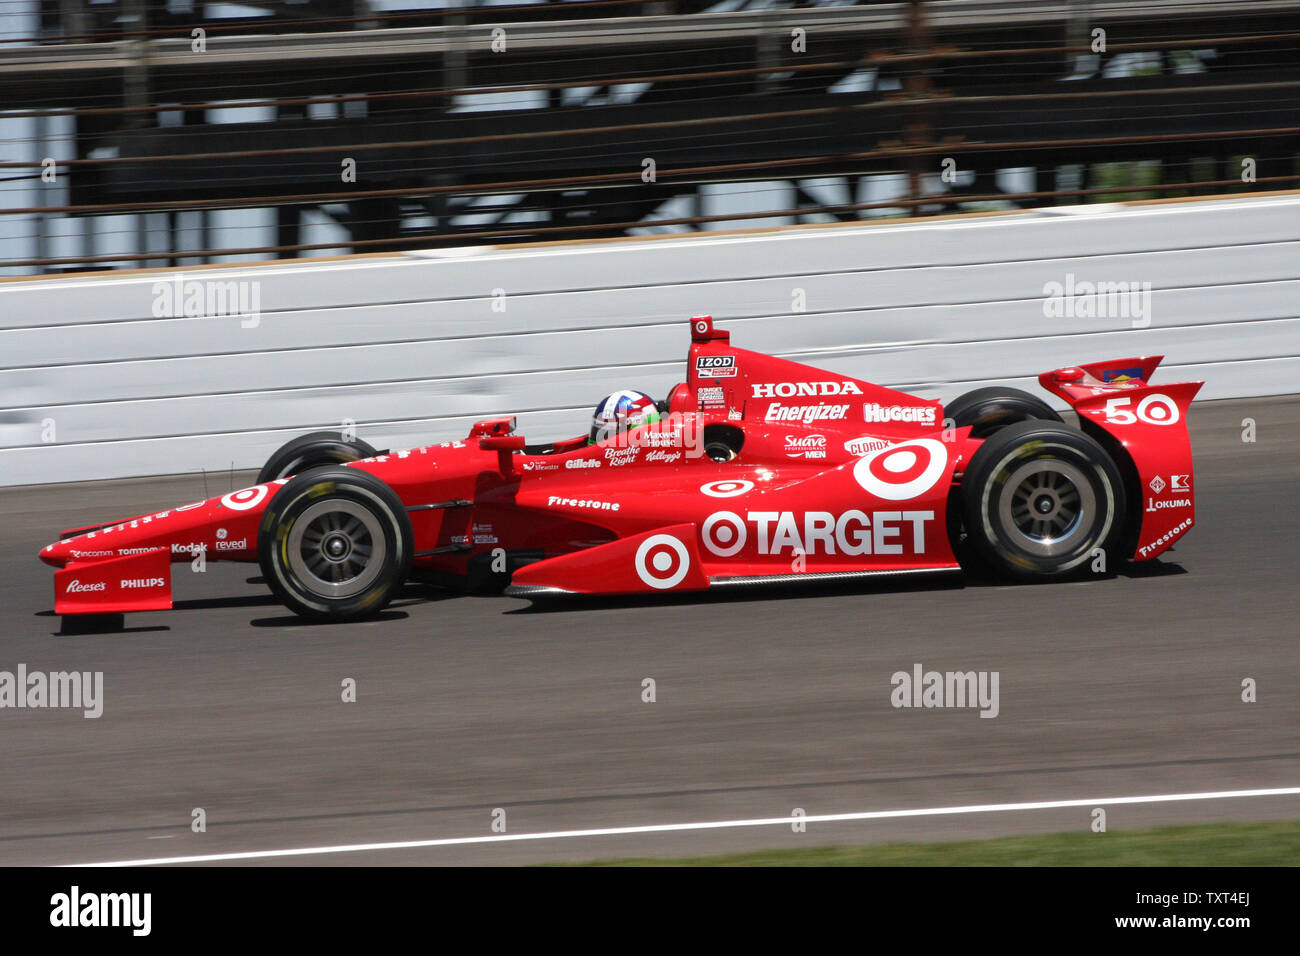 Two time Indianapolis 500 winner Dario Franchitti practices for the 96th Indianapolis 500 on May 17, 2012 in Indianapolis, Indiana. Franchitti drives for the Target Chip Ganassi racing team.     UPI/Bill Coons Stock Photo